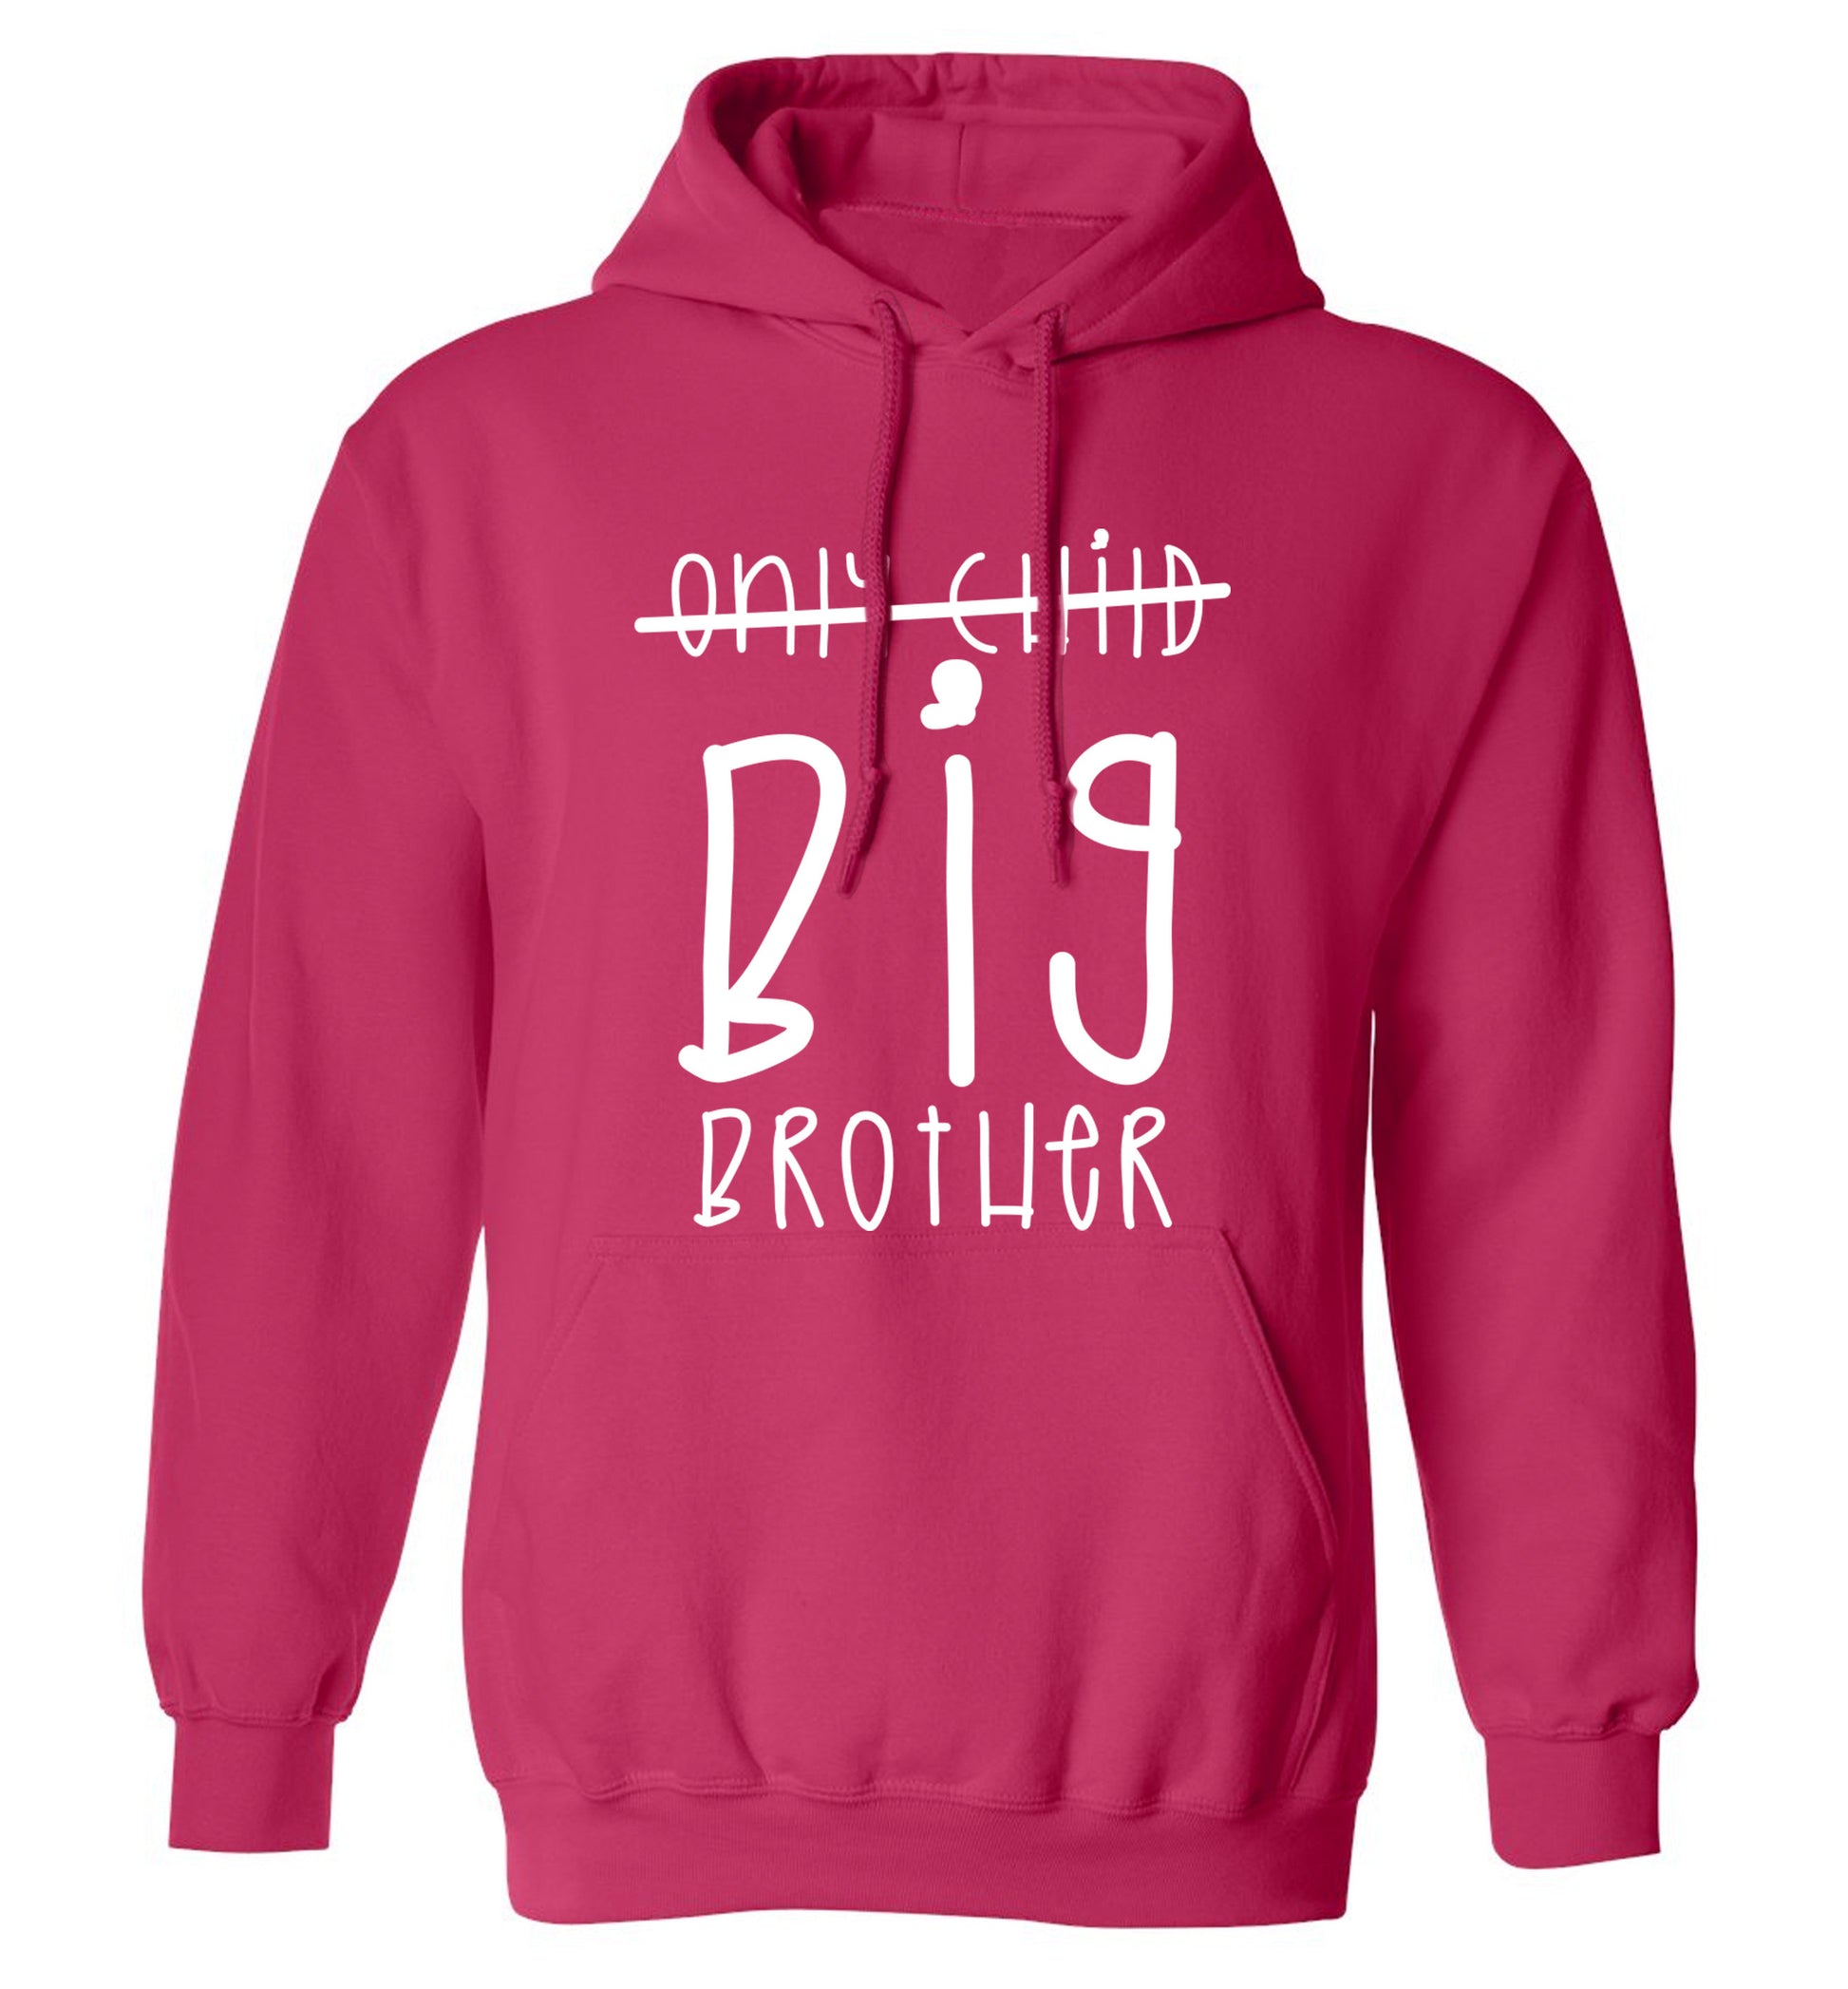 Only child big brother adults unisex pink hoodie 2XL